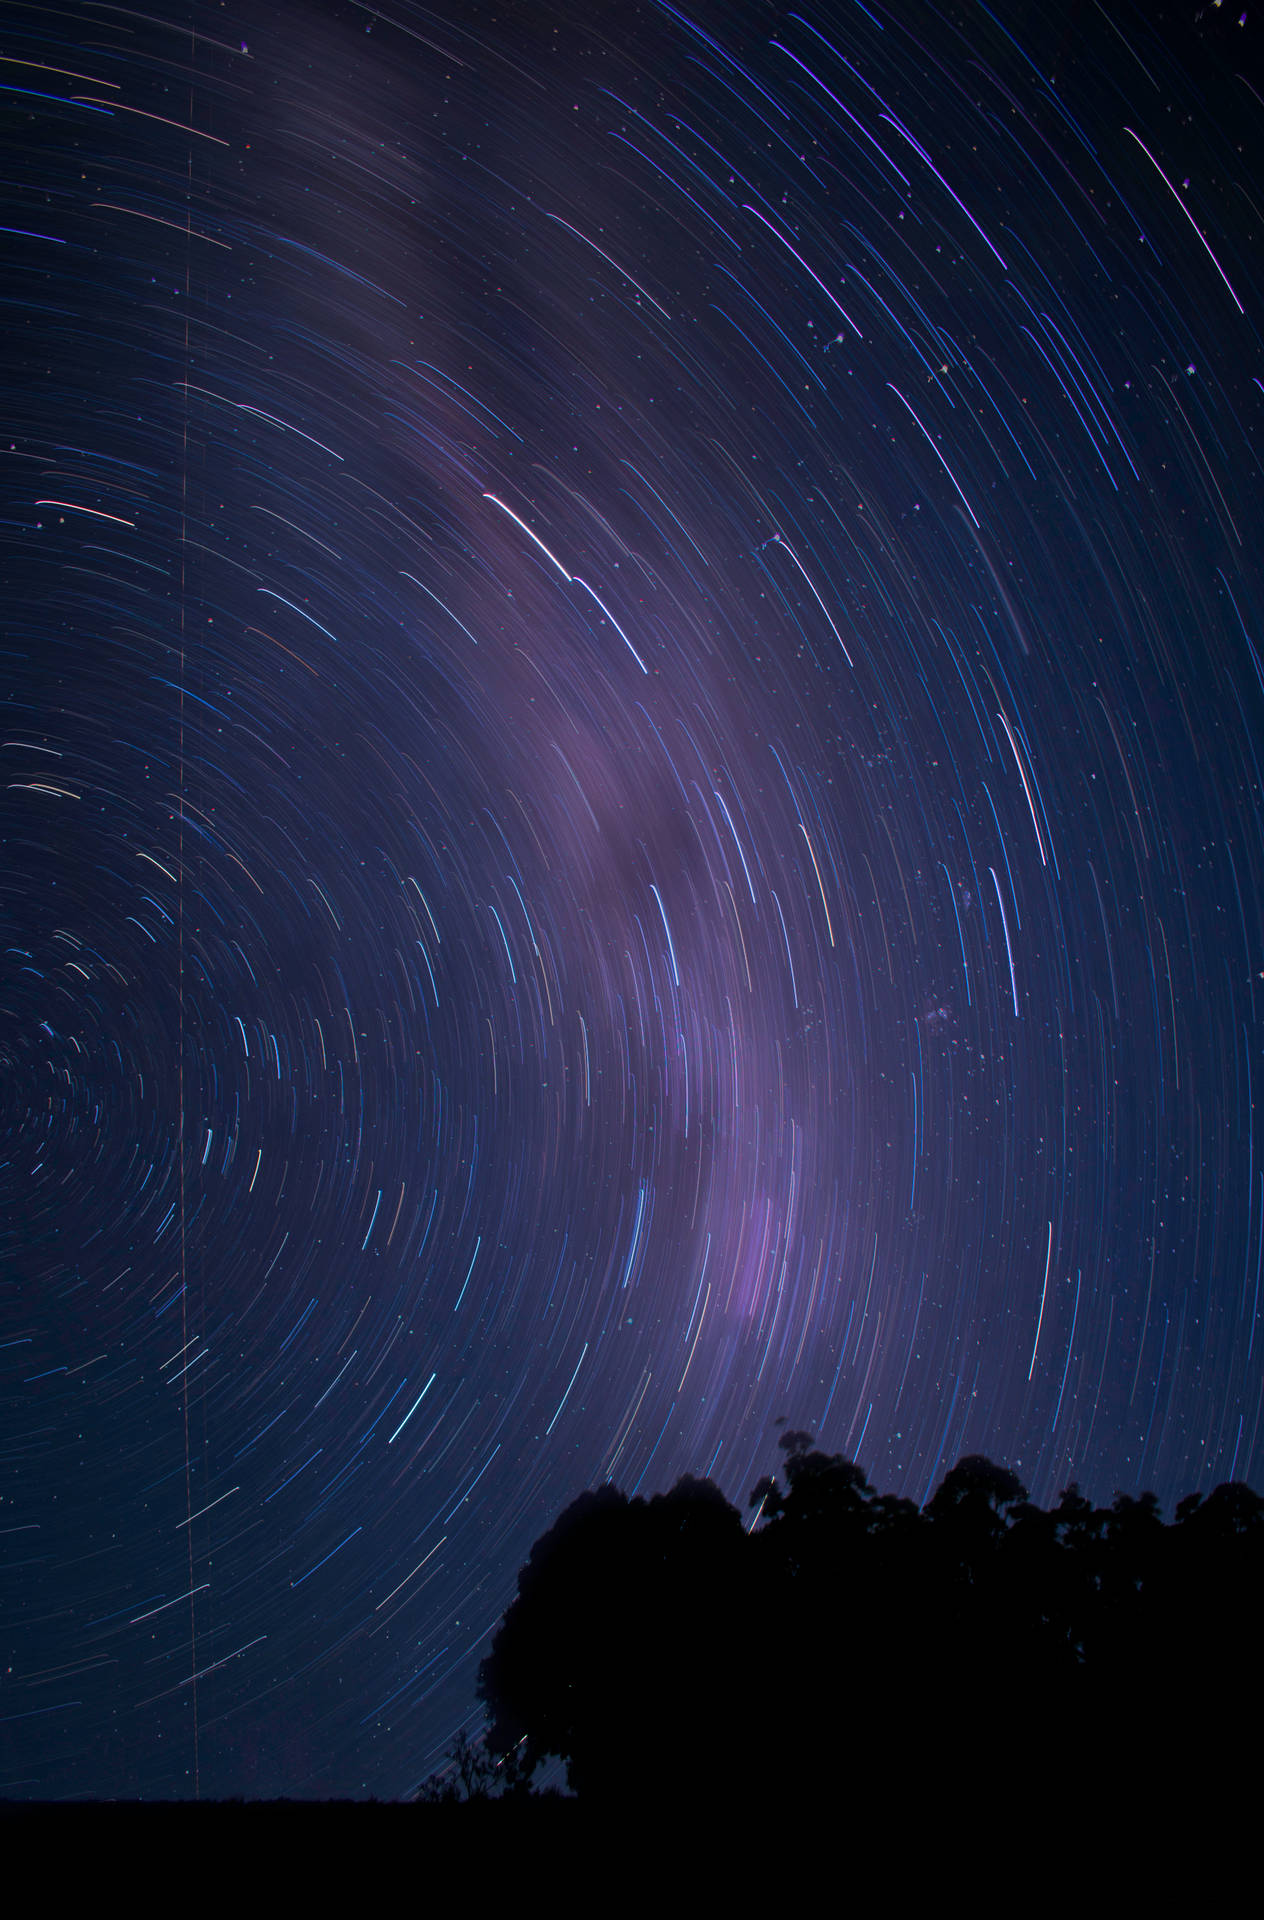 A Time-lapse Of The Incredible Star-filled Galaxy Background